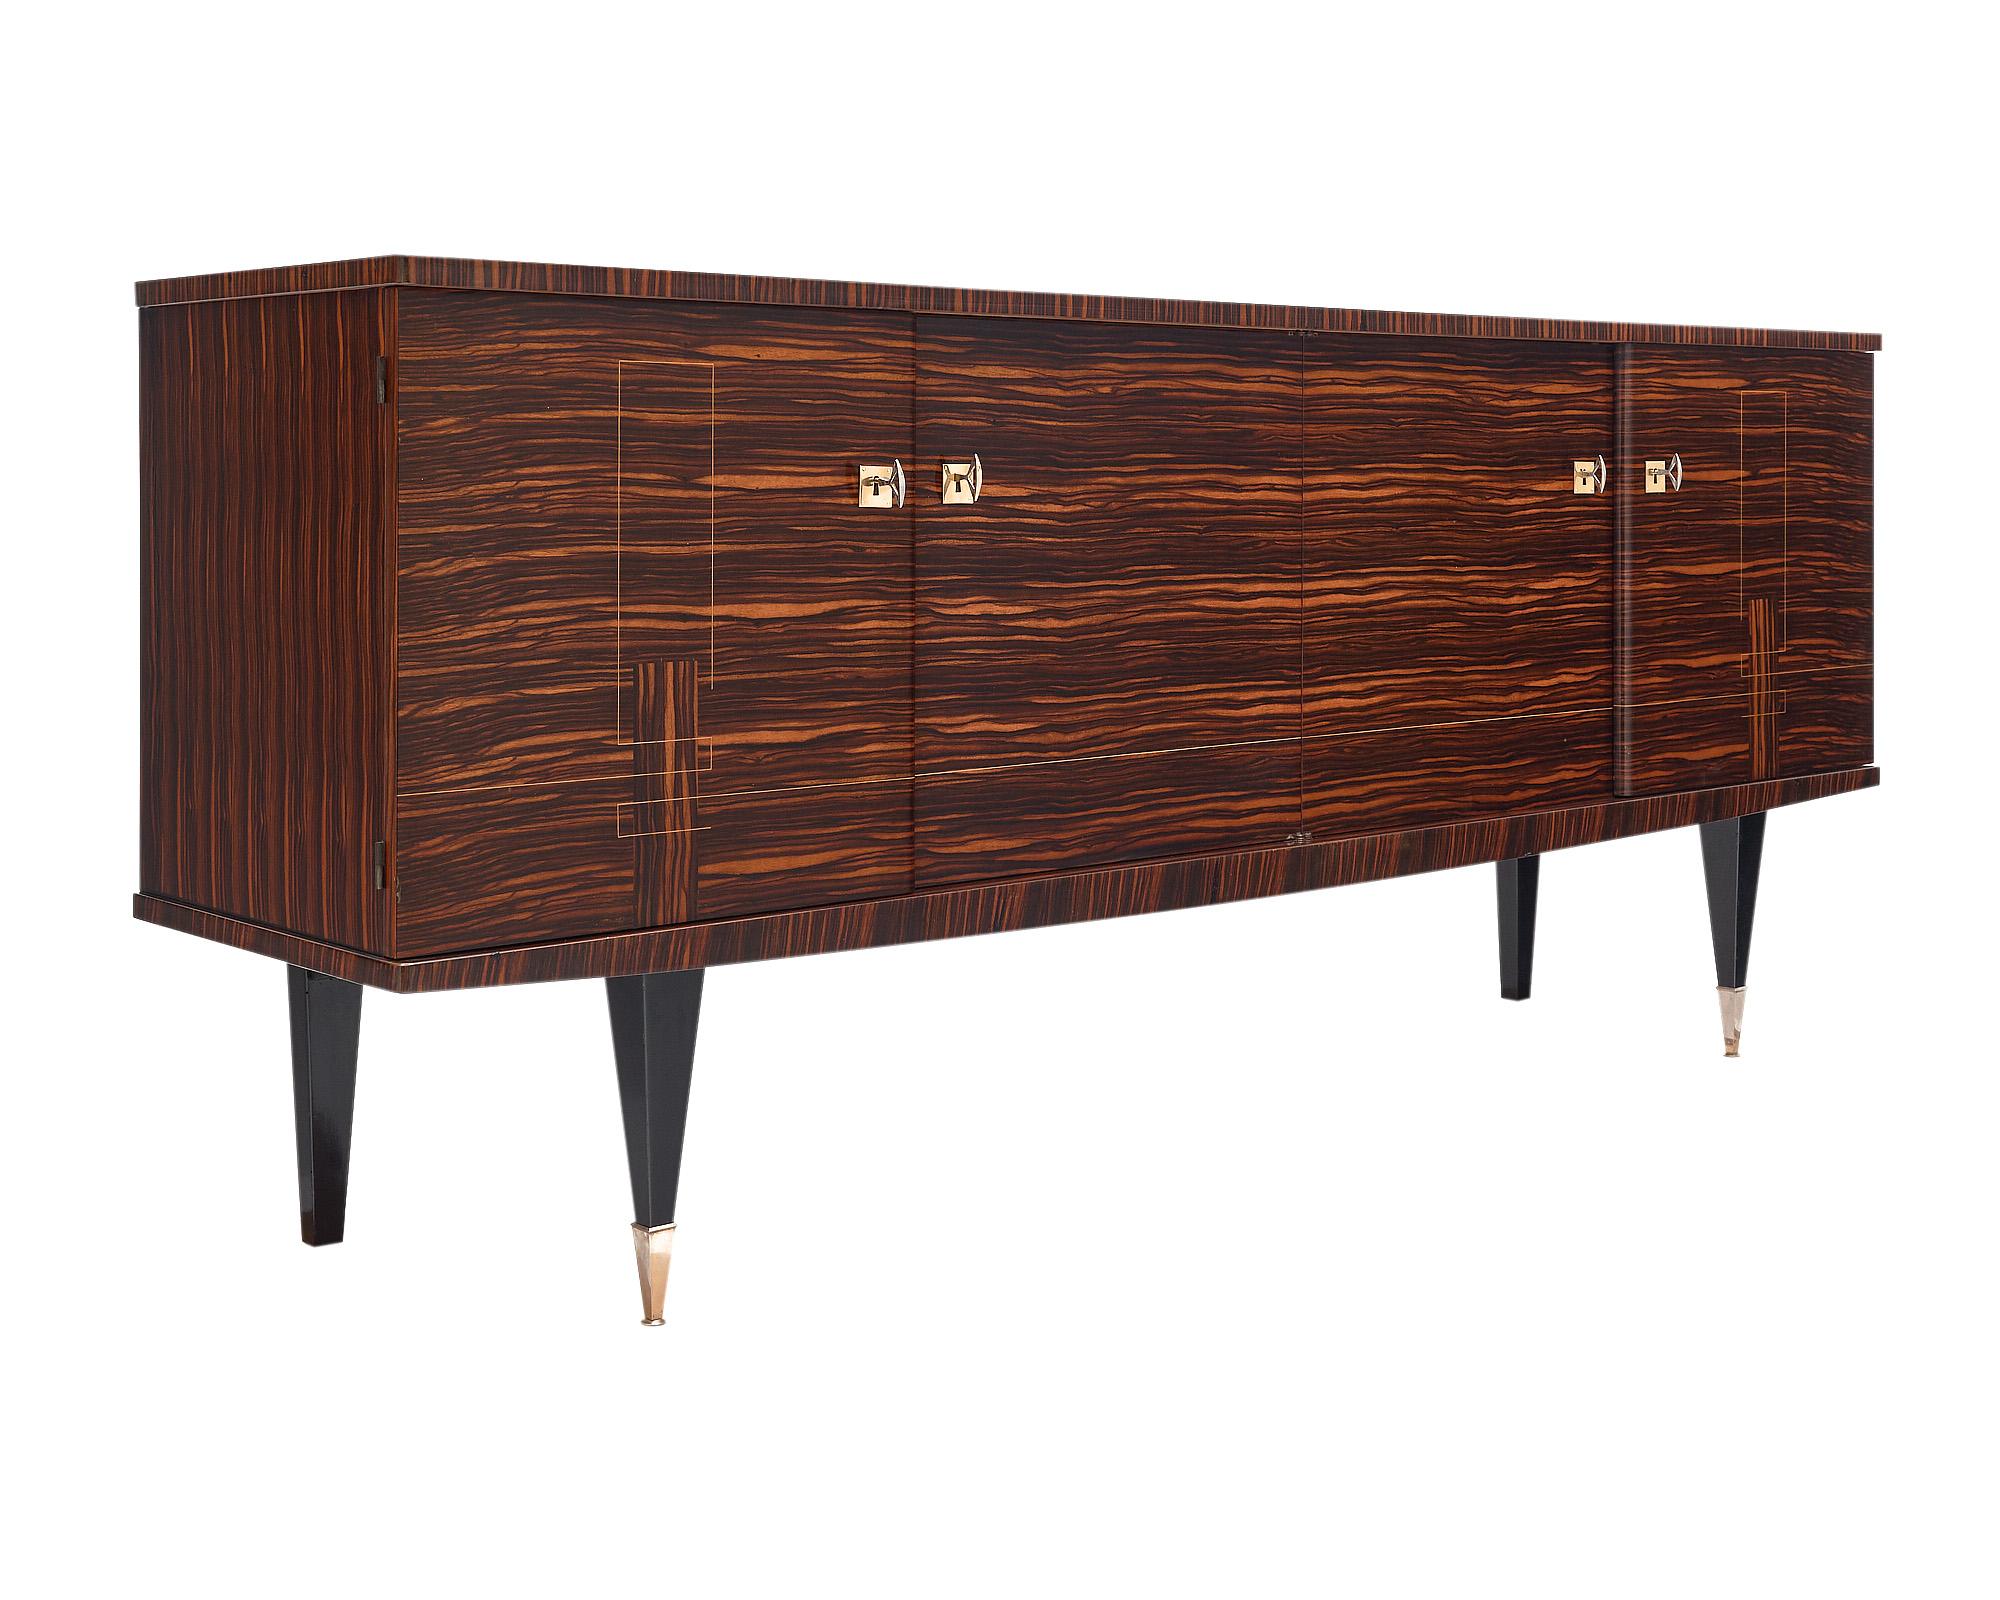 Buffet / Enfilade, in a classic French mid-century modern style and made of rare Macassar of ebony wood adorned with lemon wood inlays. The four doors, with their original brass working locks and keys, open up to an adjustable satin wood interior